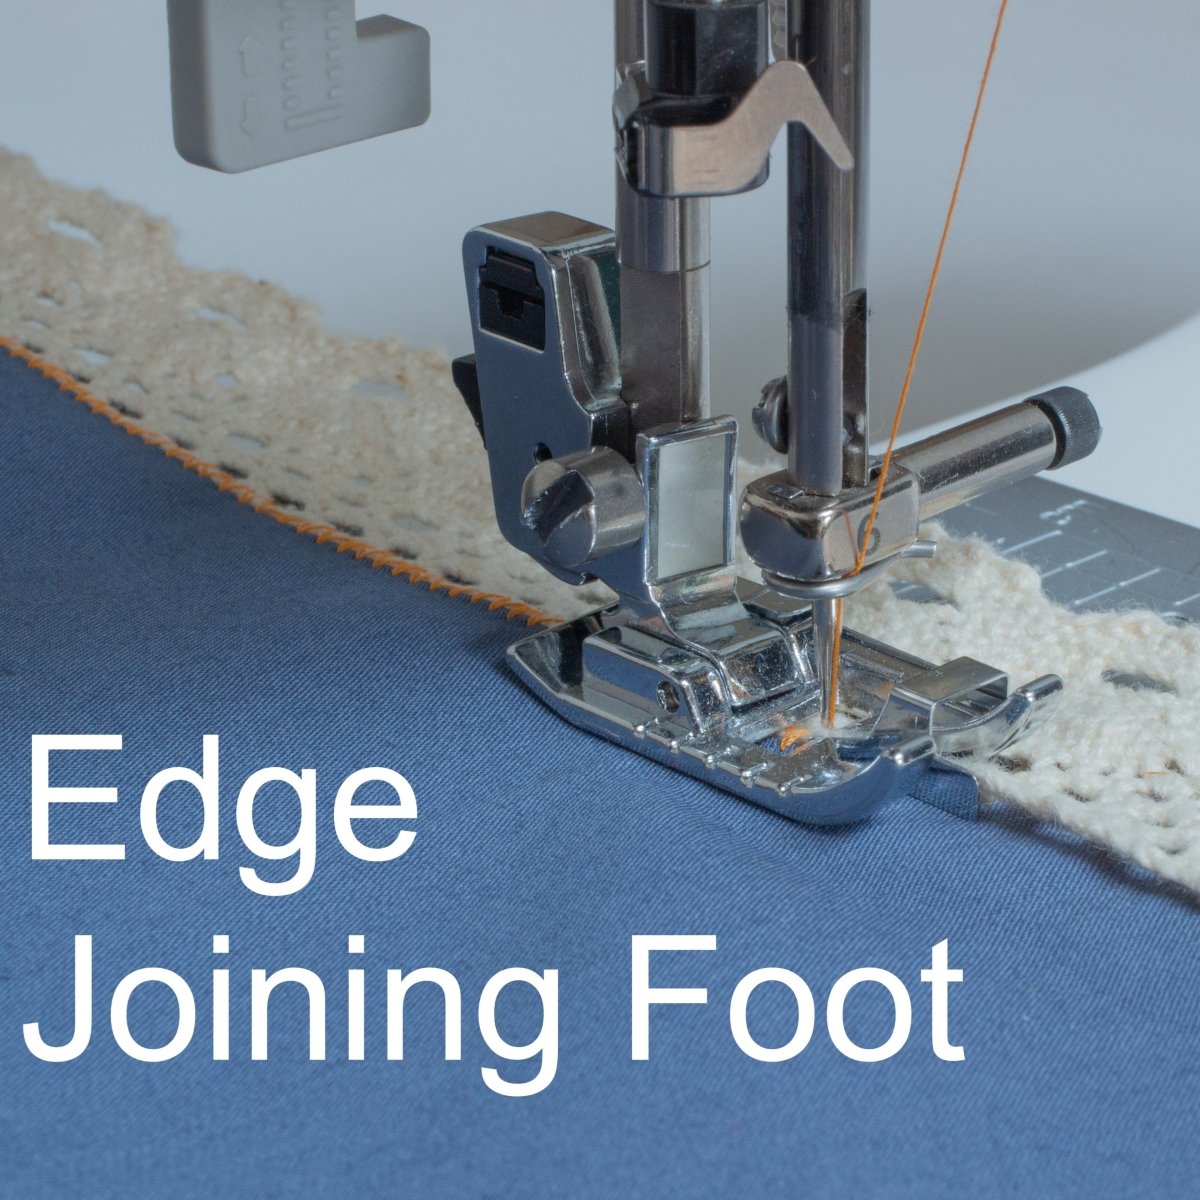 edge joining foot on a sewing machine joining two pieces of fabric